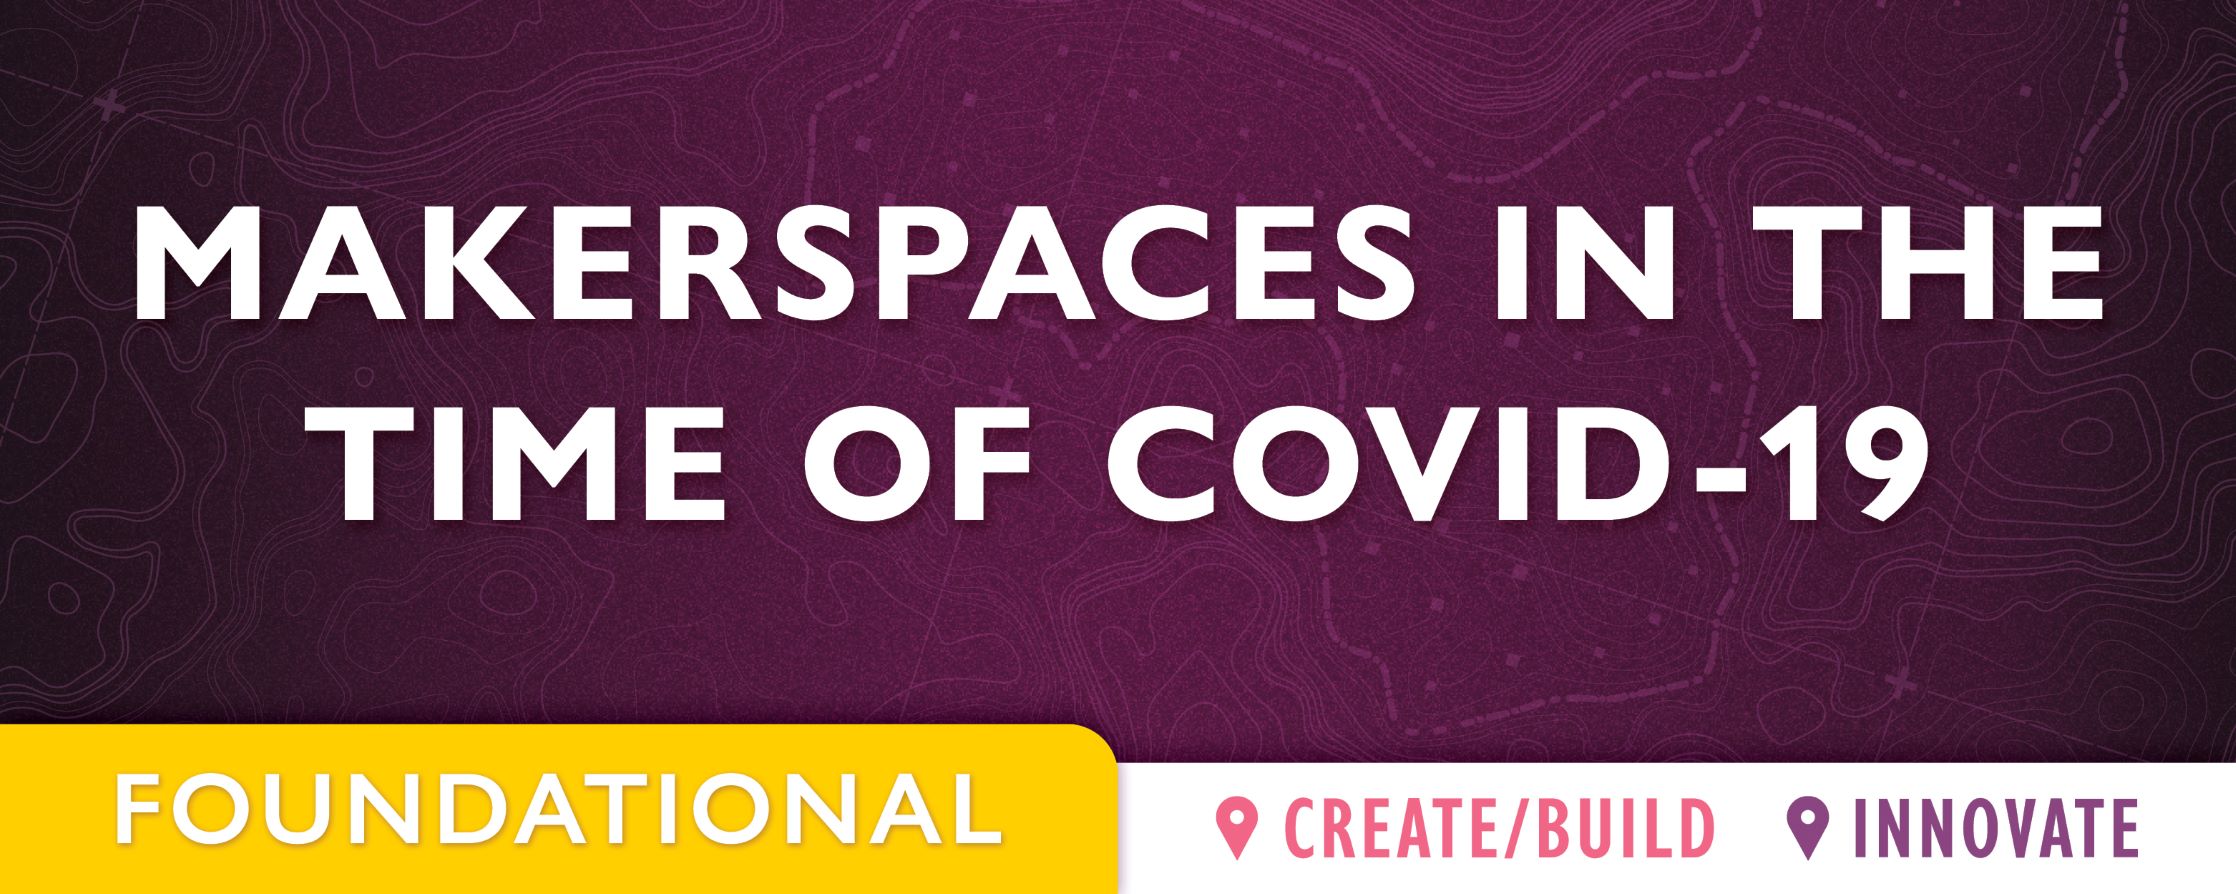 purple background with text: Makerspaces in the Time of Covid-19